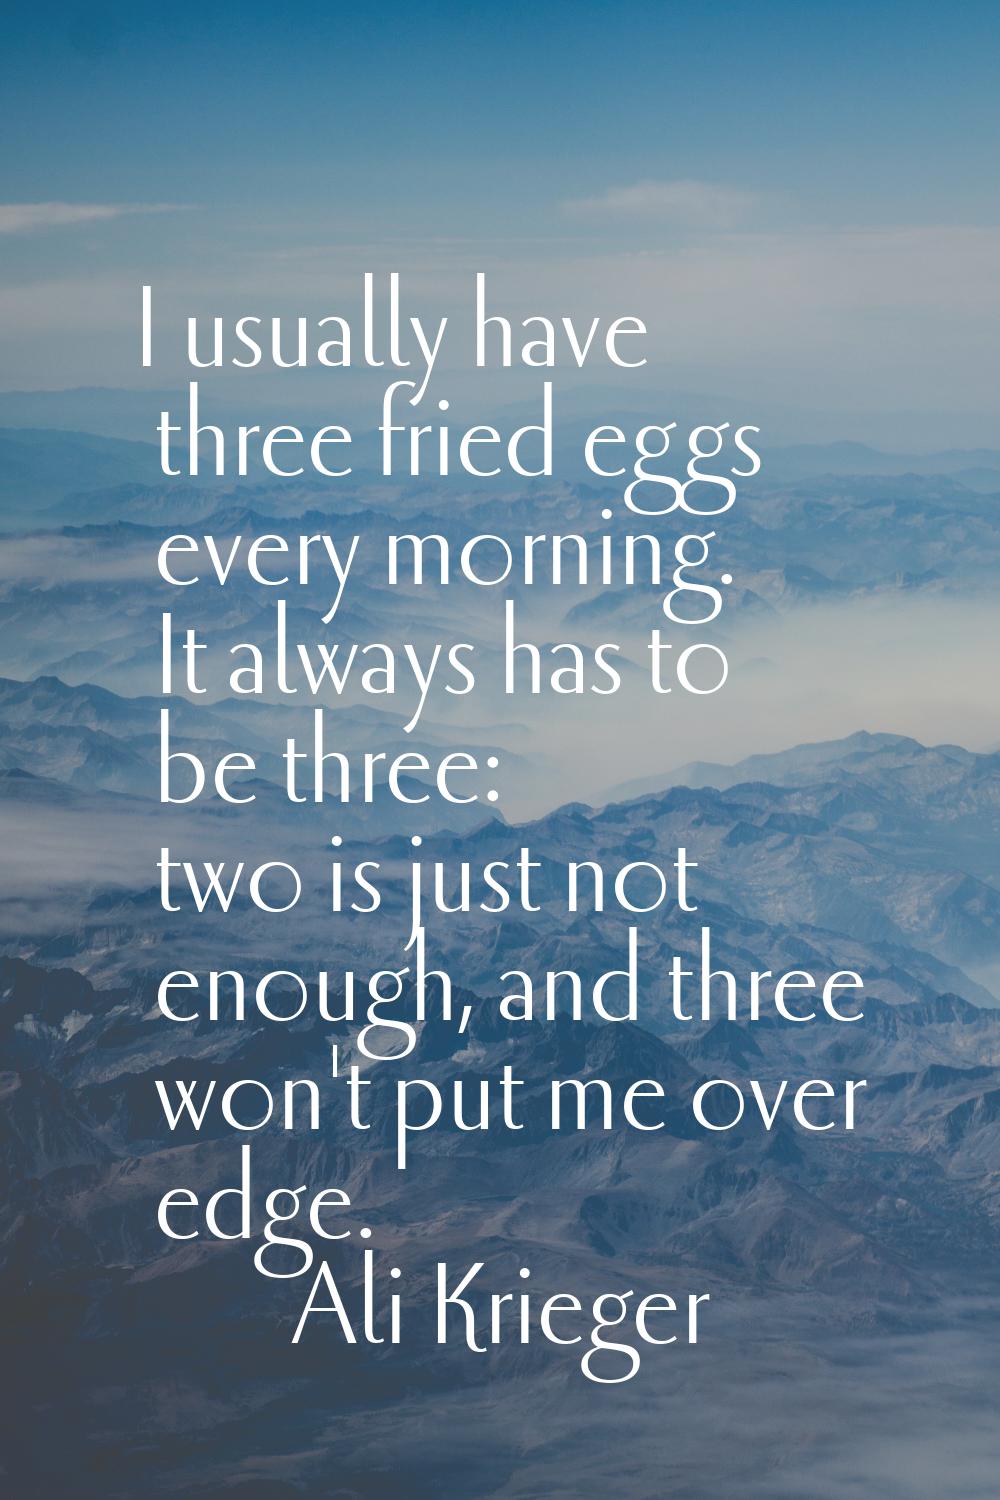 I usually have three fried eggs every morning. It always has to be three: two is just not enough, a